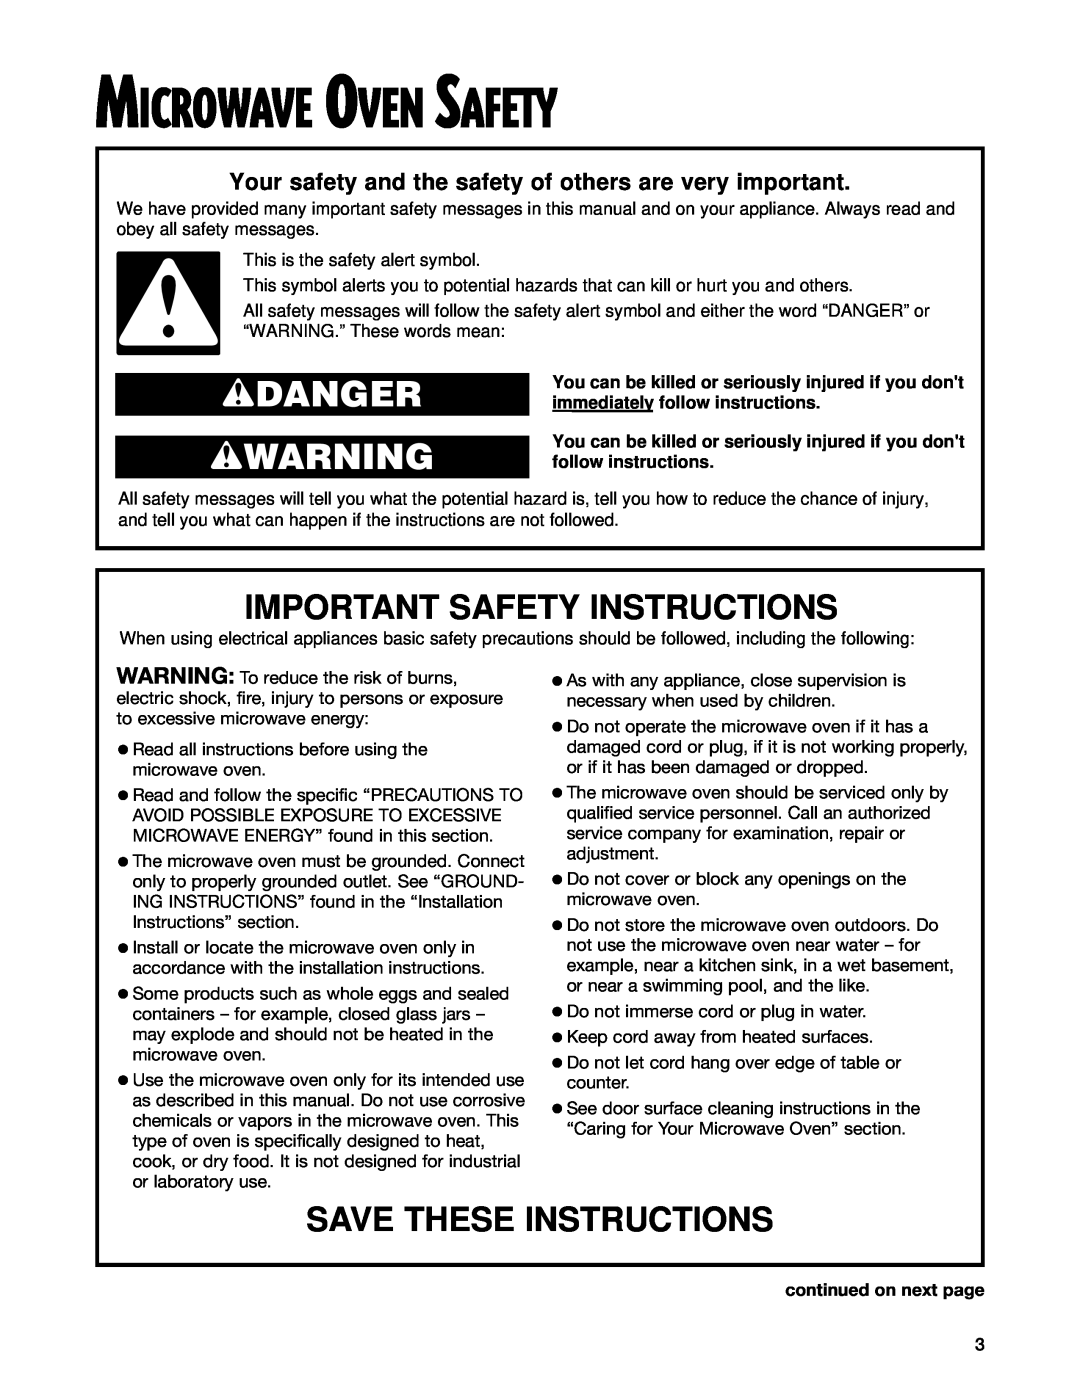 Whirlpool MT3105SH Microwave Oven Safety, wDANGER wWARNING, Important Safety Instructions, Save These Instructions 